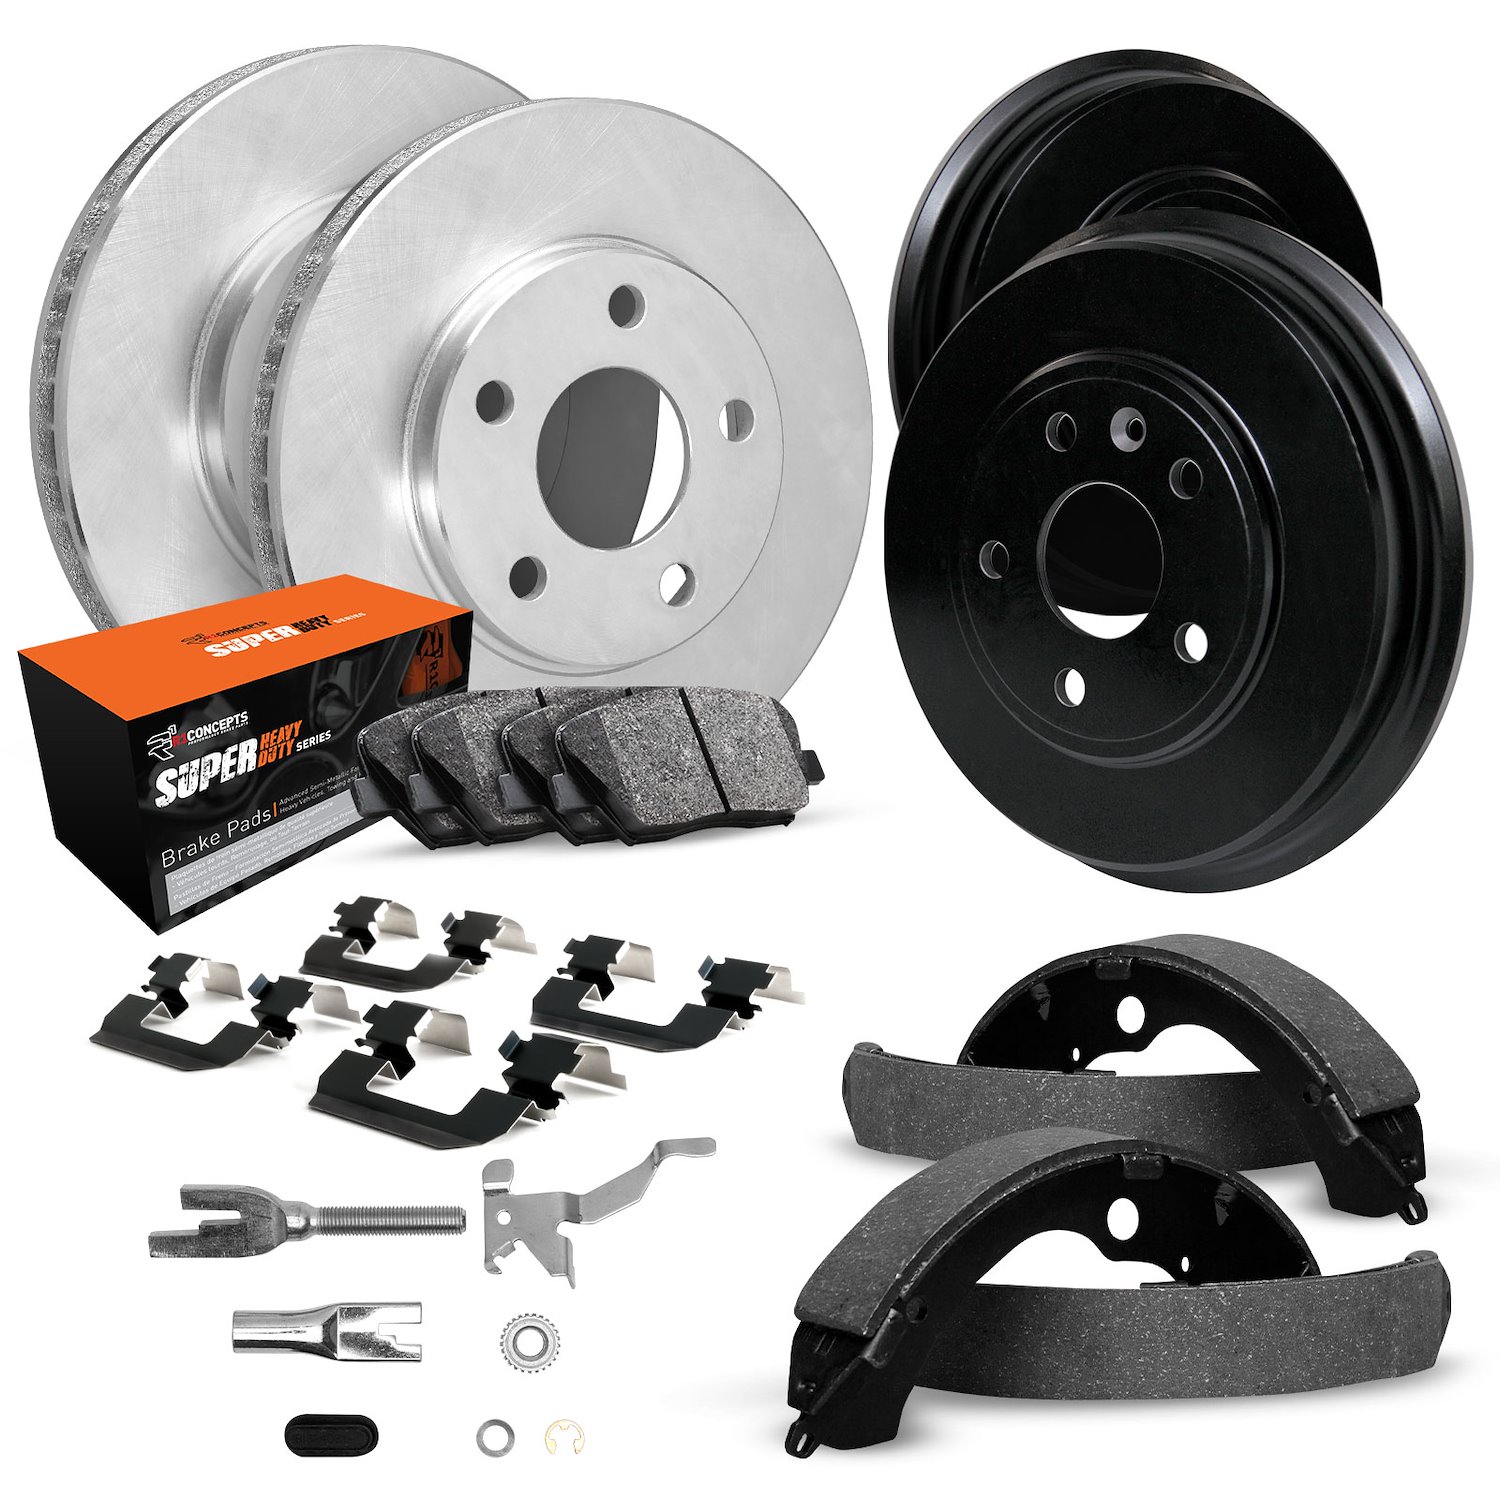 E-Line Blank Brake Rotor & Drum Set w/Super-Duty Pads, Shoes, Hardware, & Adjusters, 1990-1994 Ford/Lincoln/Mercury/Mazda